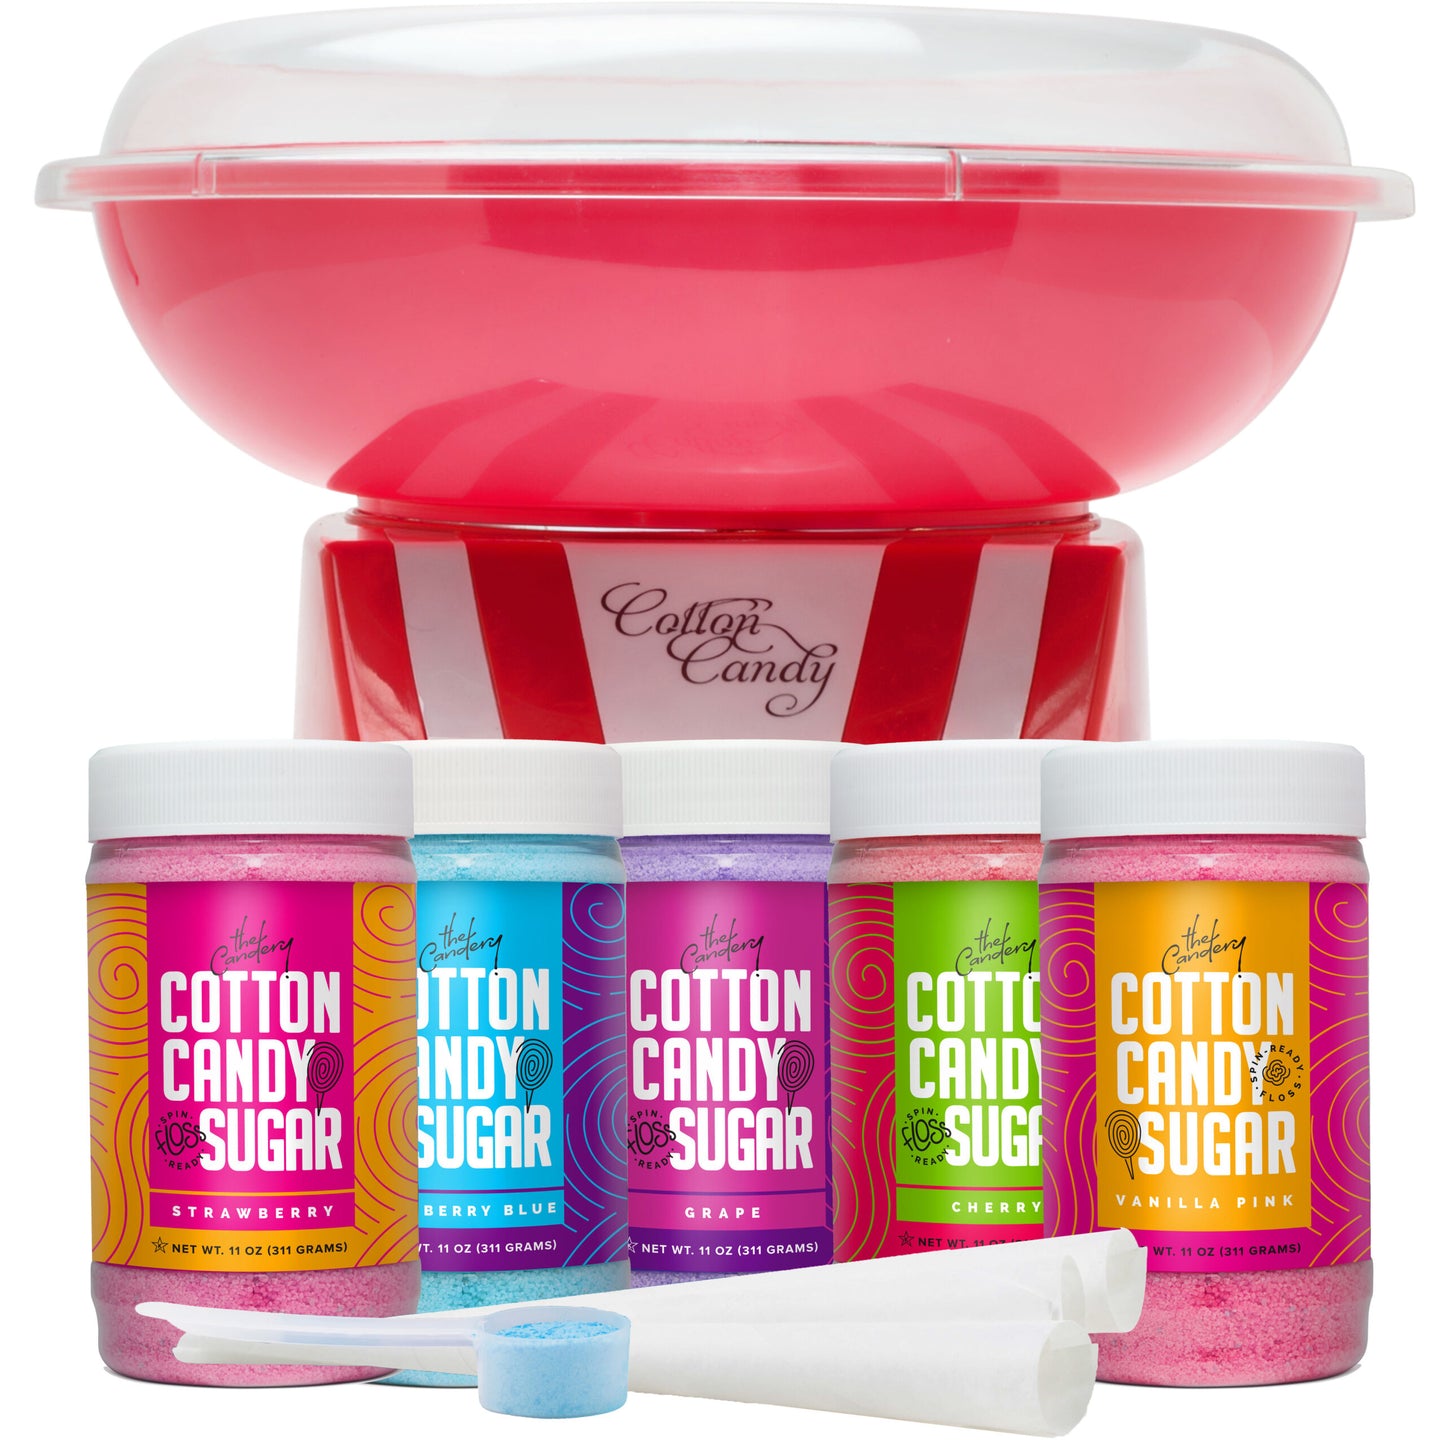 Standard Cotton Candy Machine Kit With 5-Pack Sugar Floss